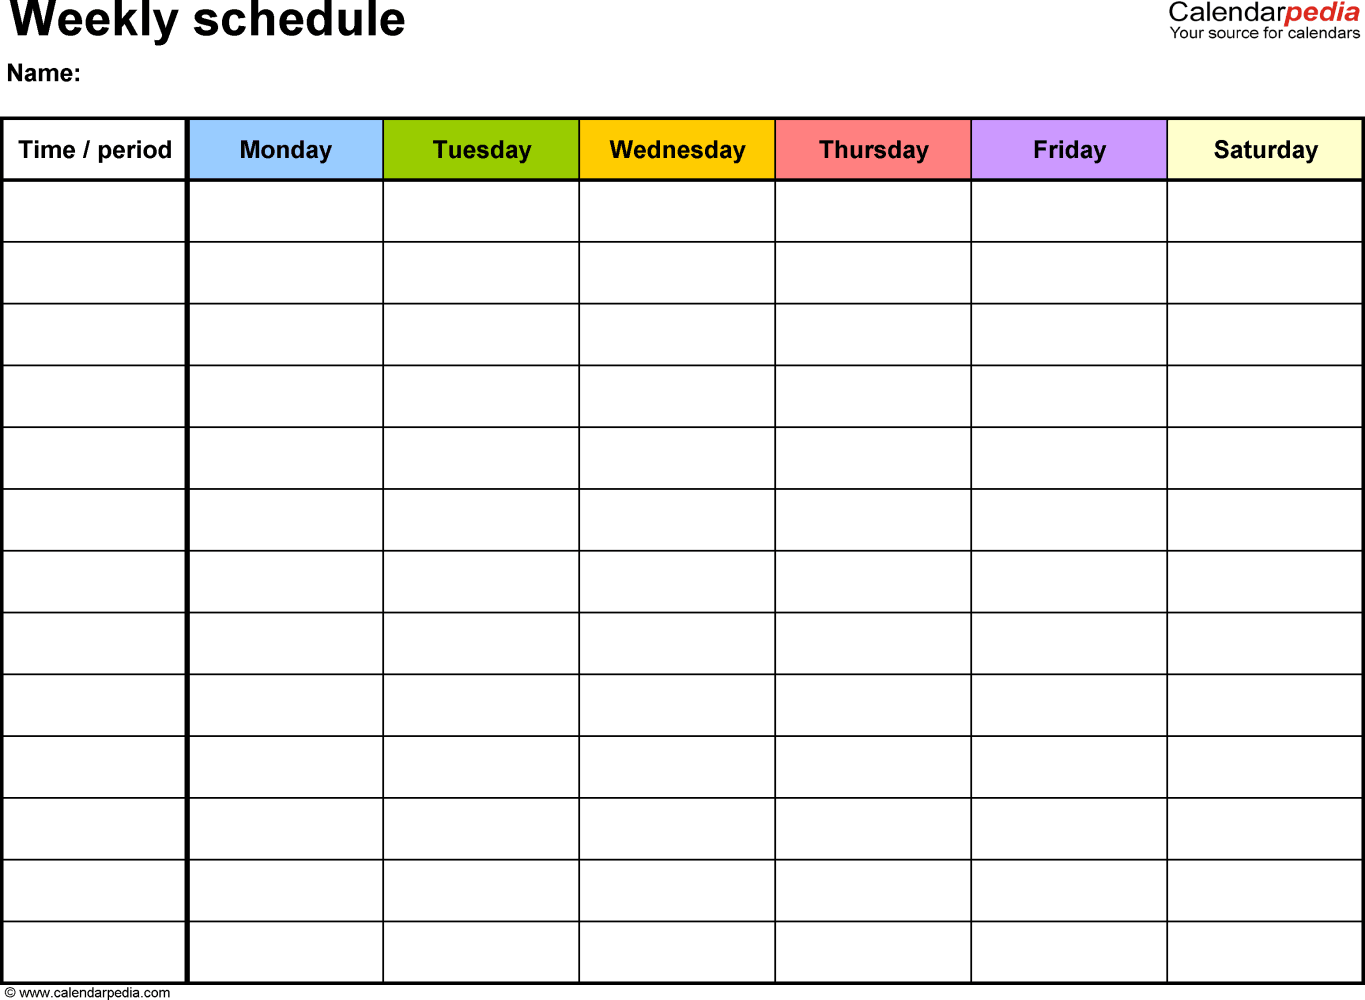 Weekly Schedule Template Excel task list templates